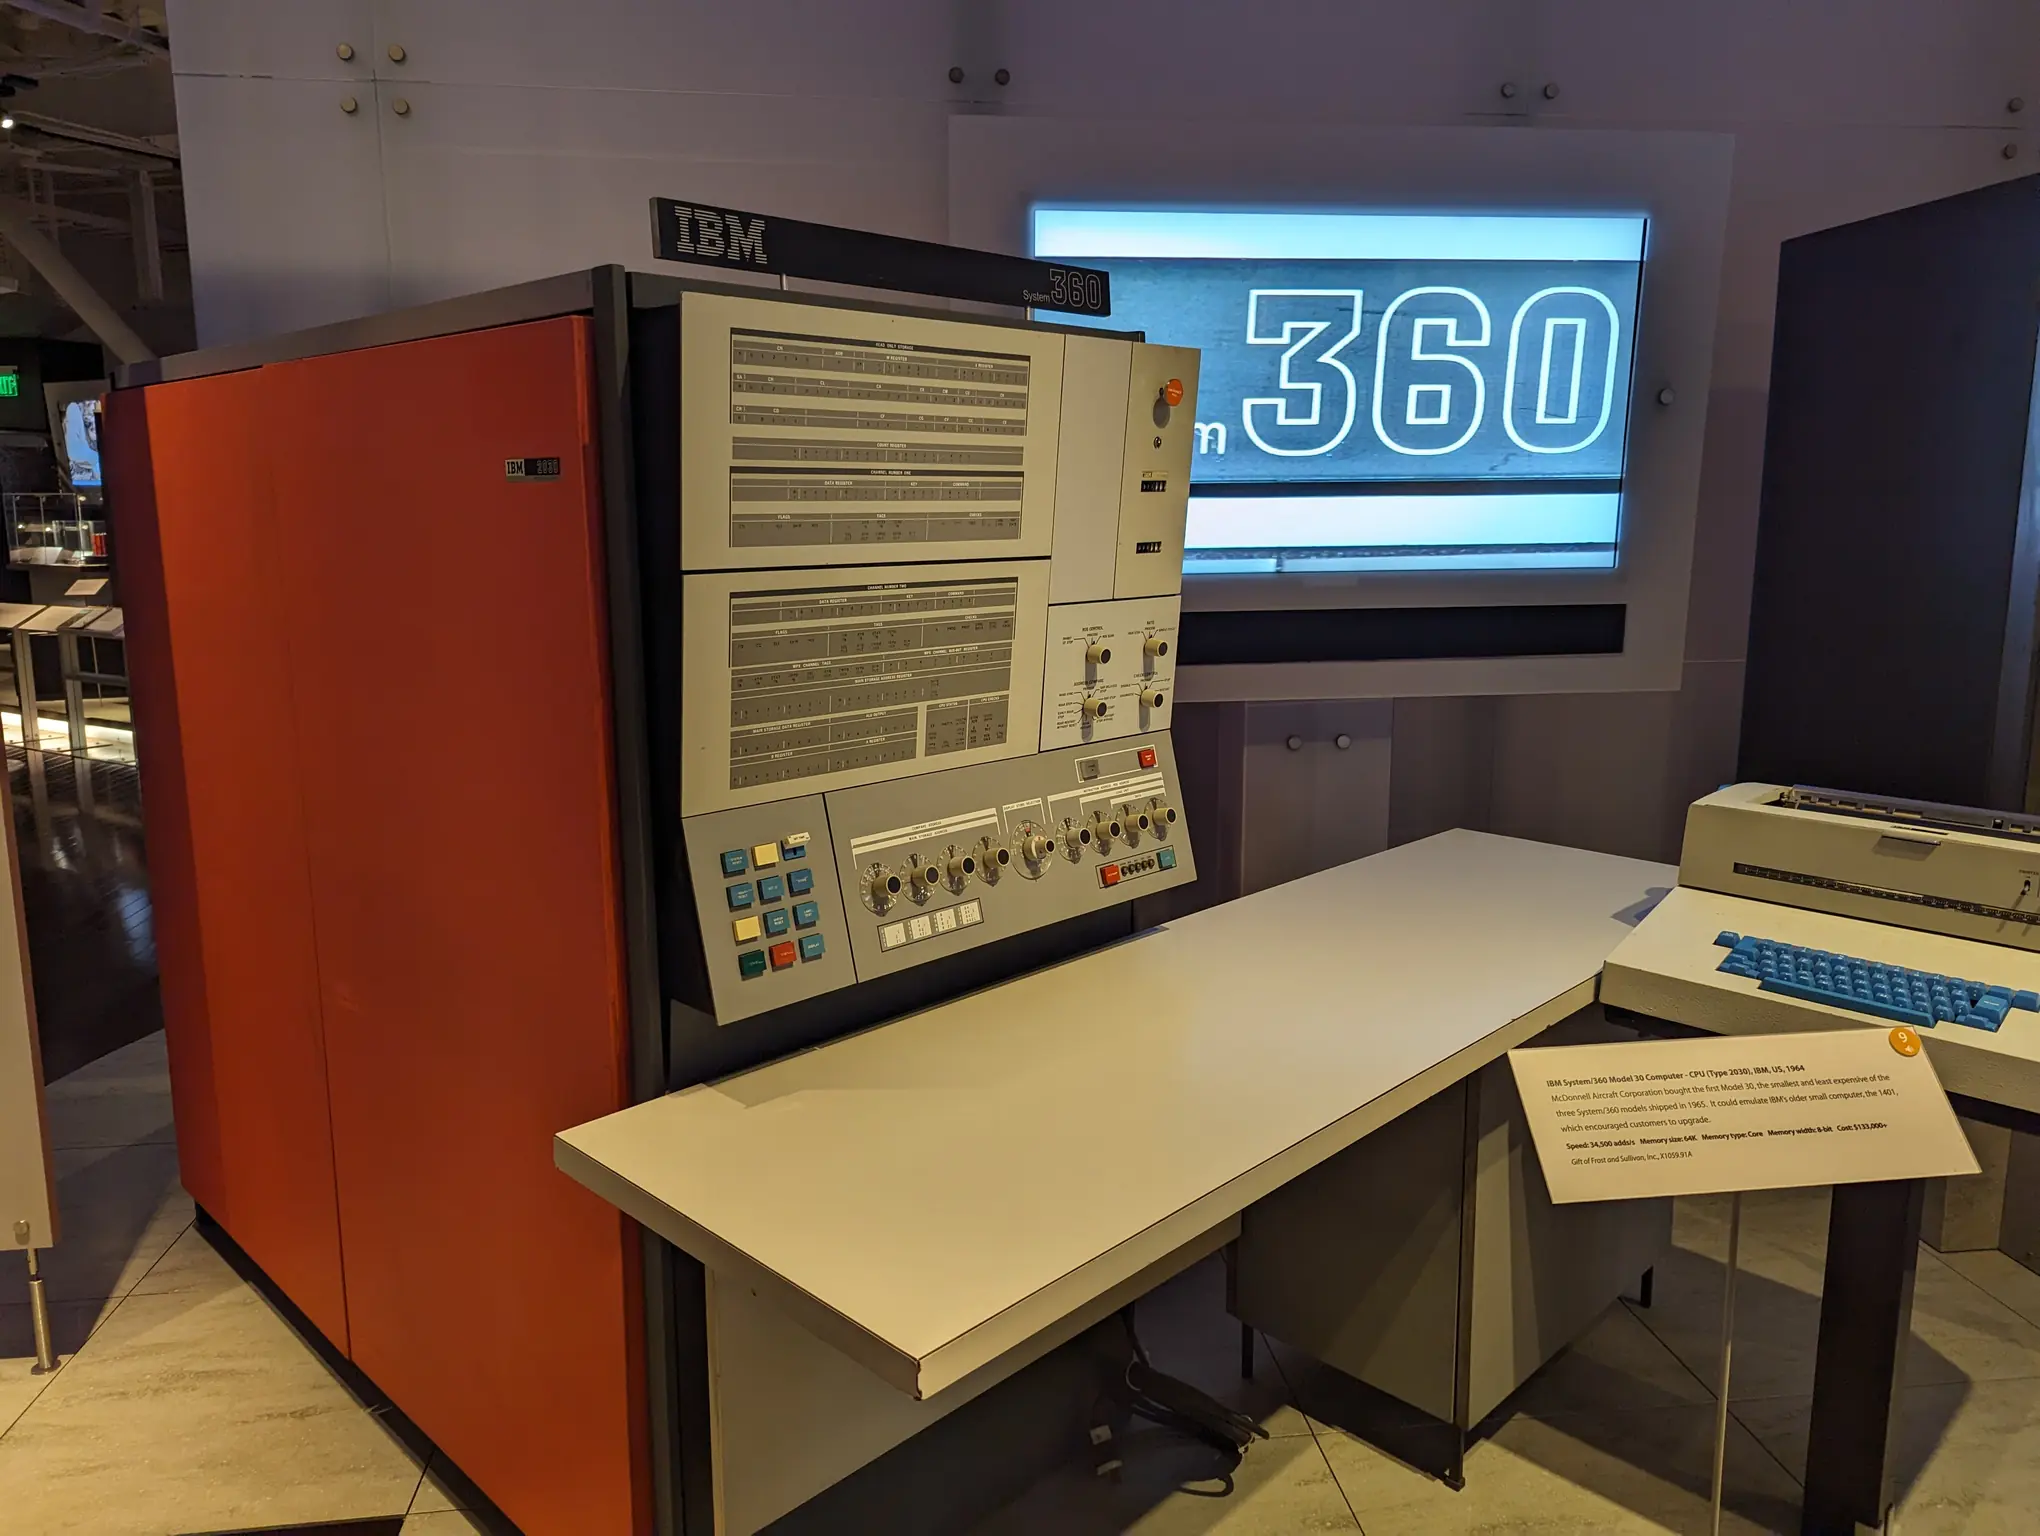 IBM System/360 at Computer History Museum